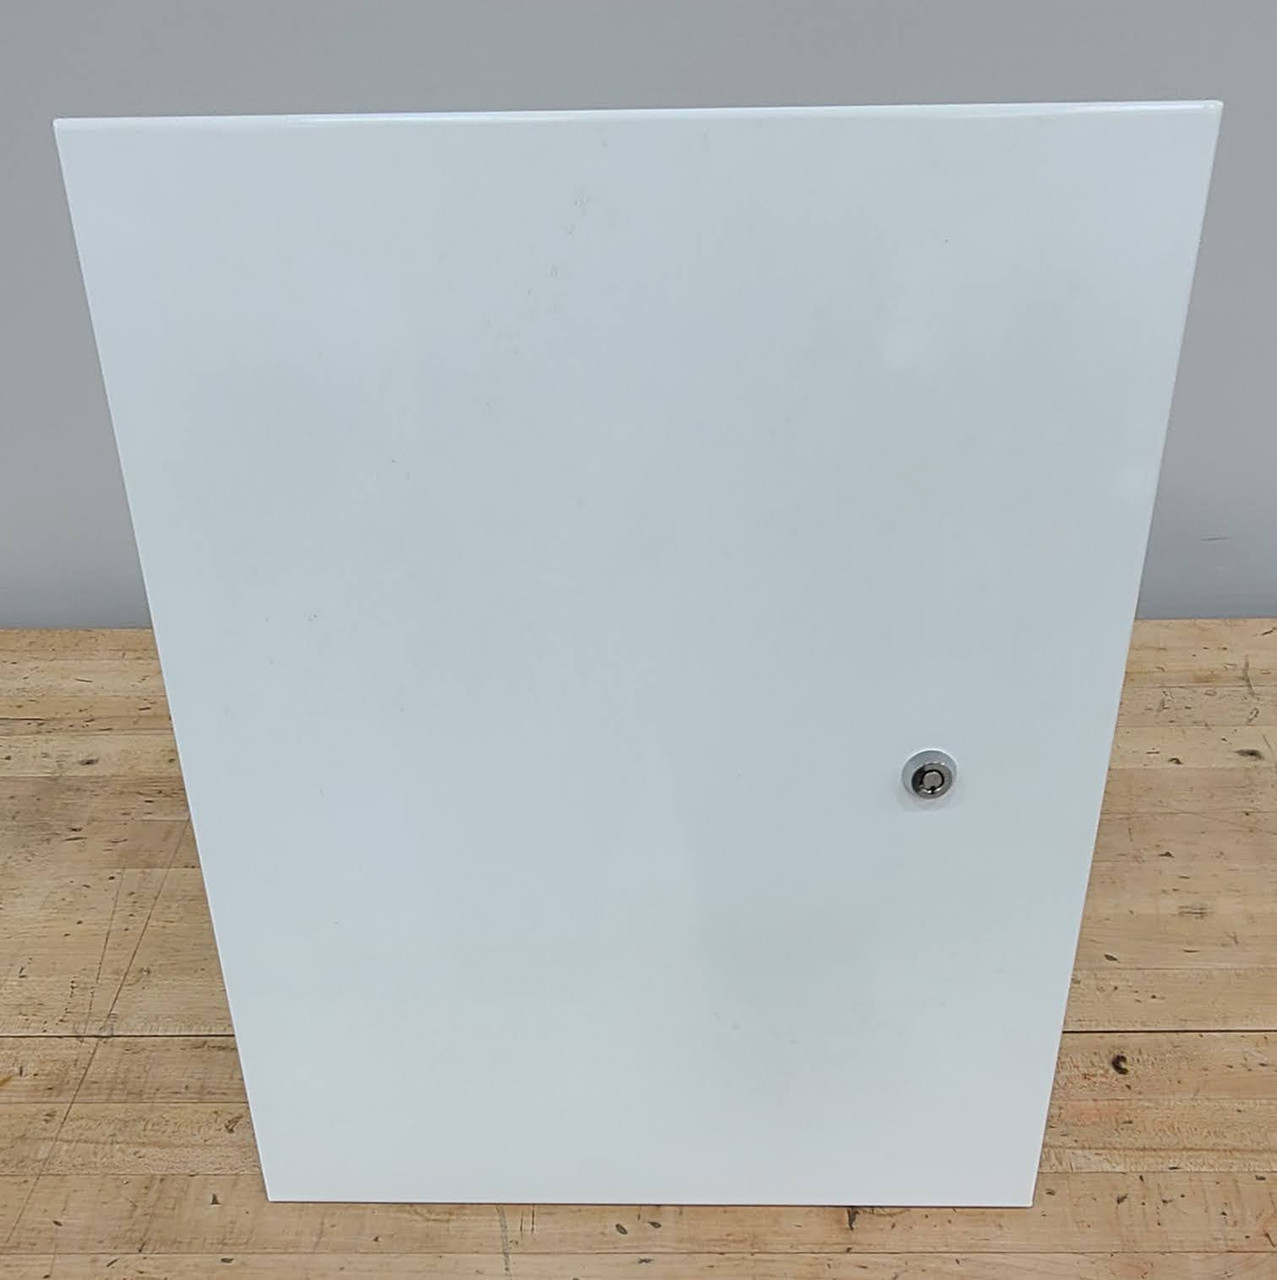 Multi-Purpose Industrial Lockable Cabinet 30 x 20 x 8 White Steel Recessed Mounted NO KOs, Small Scratches CAB189